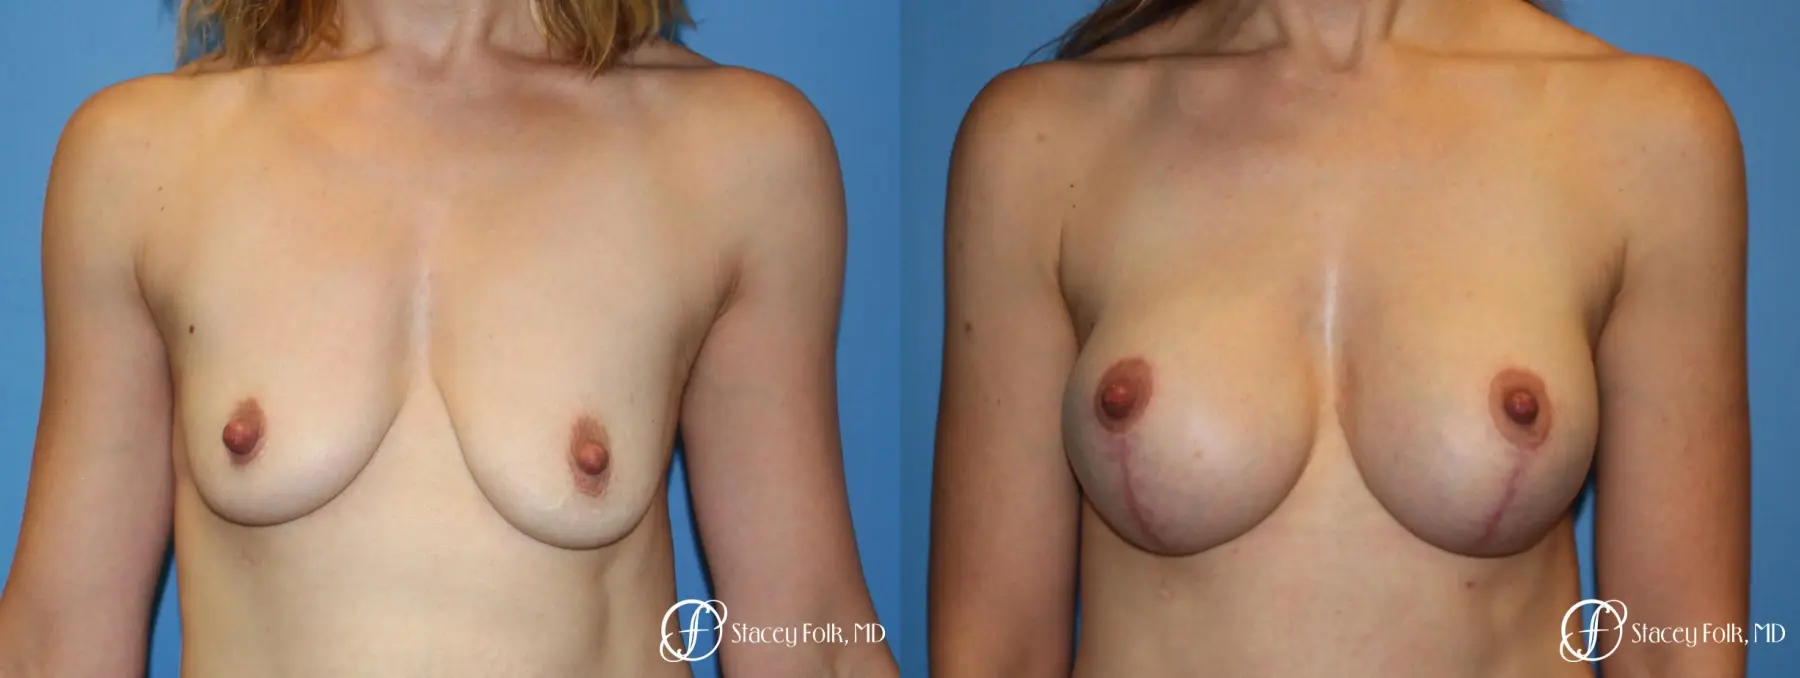 Breast Augmentation and Breast lift (Mastopexy) - Before and After 1